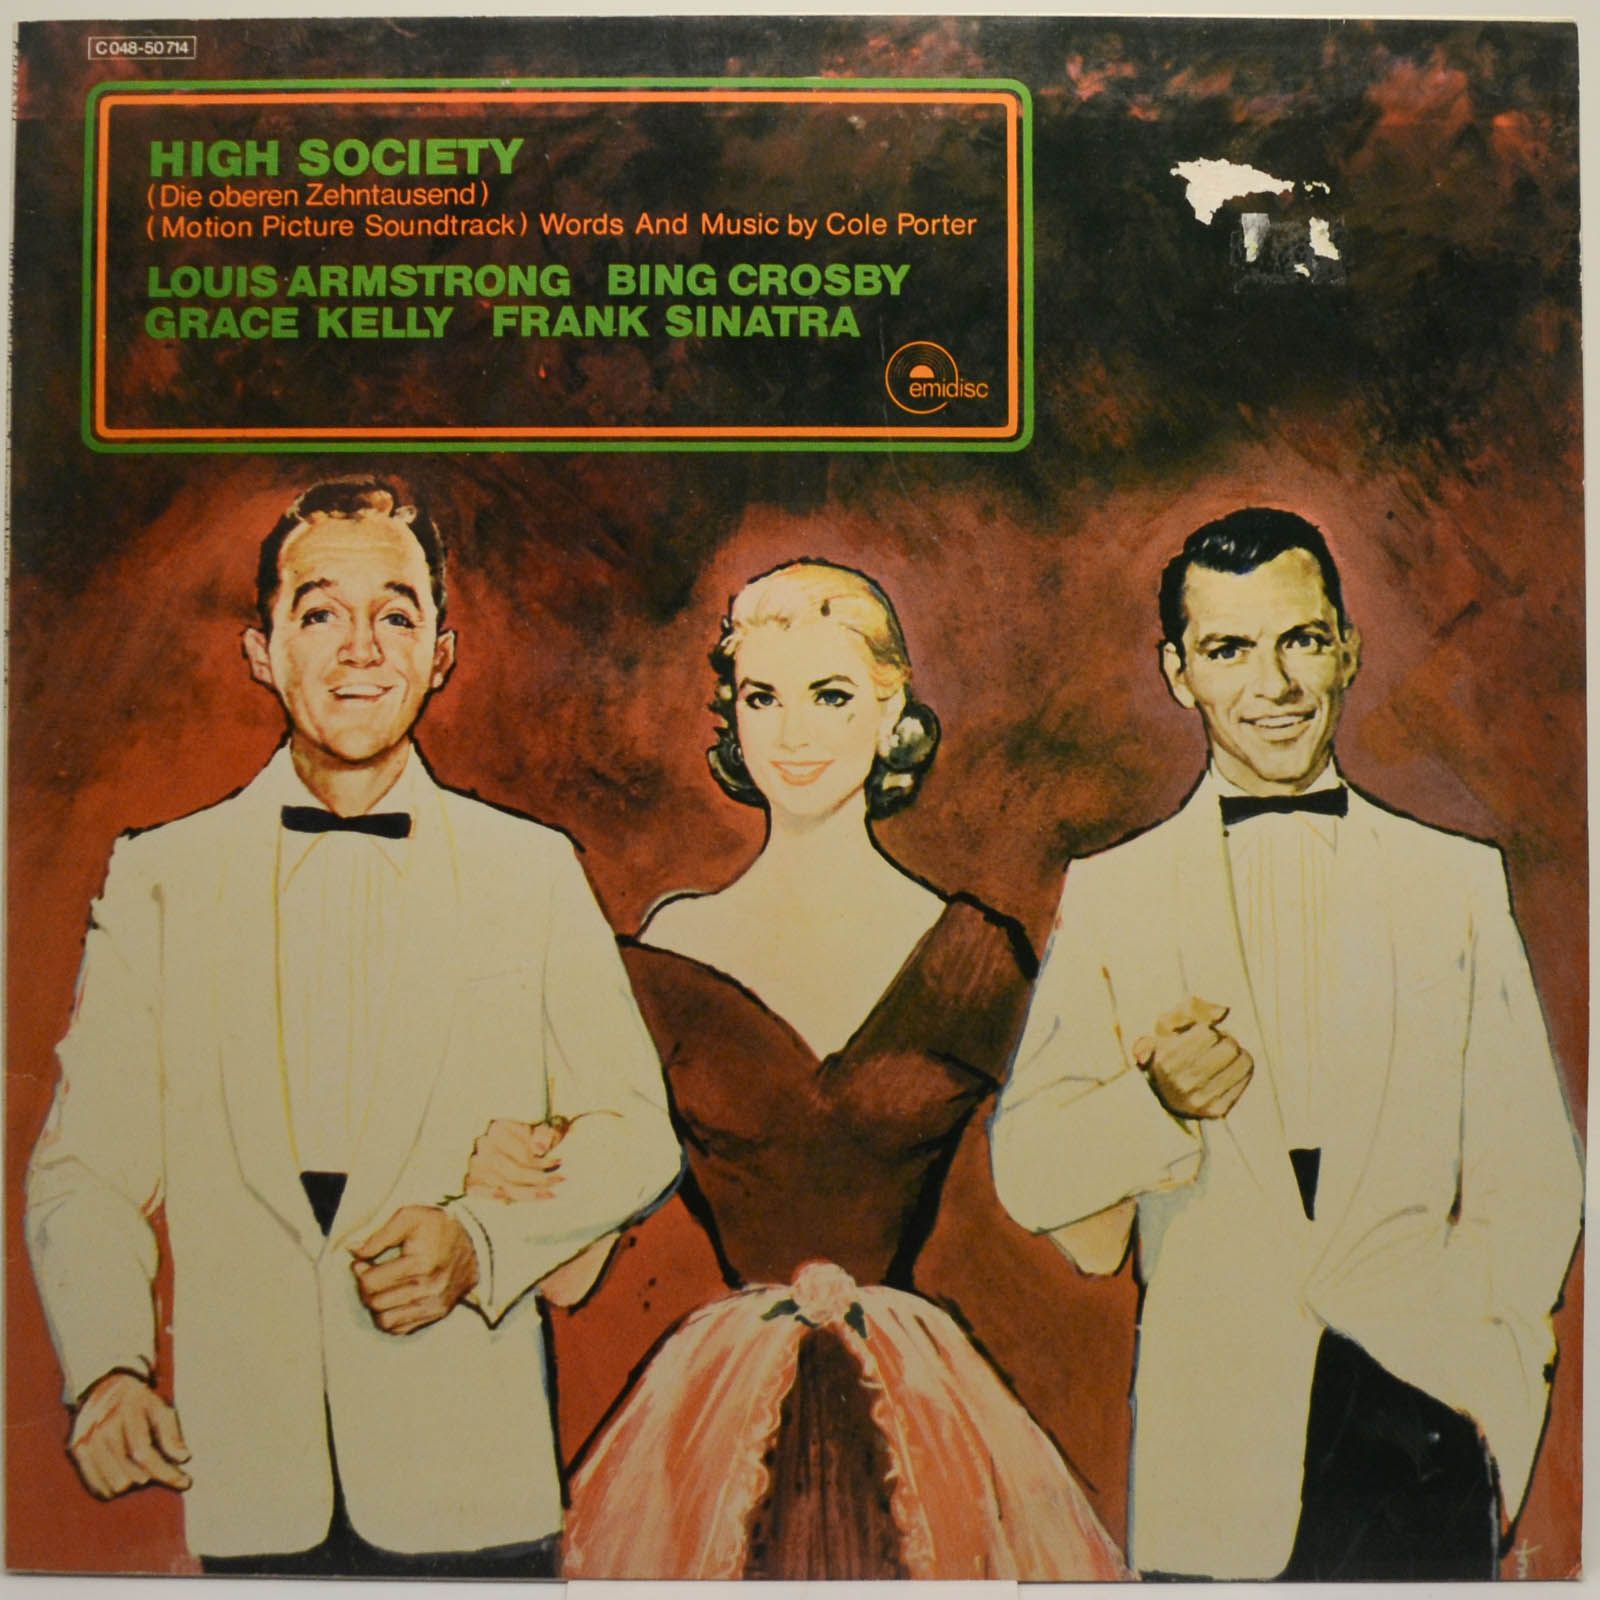 Various — High Society (Die Oberen Zehntausend) (Motion Picture Soundtrack), 1956